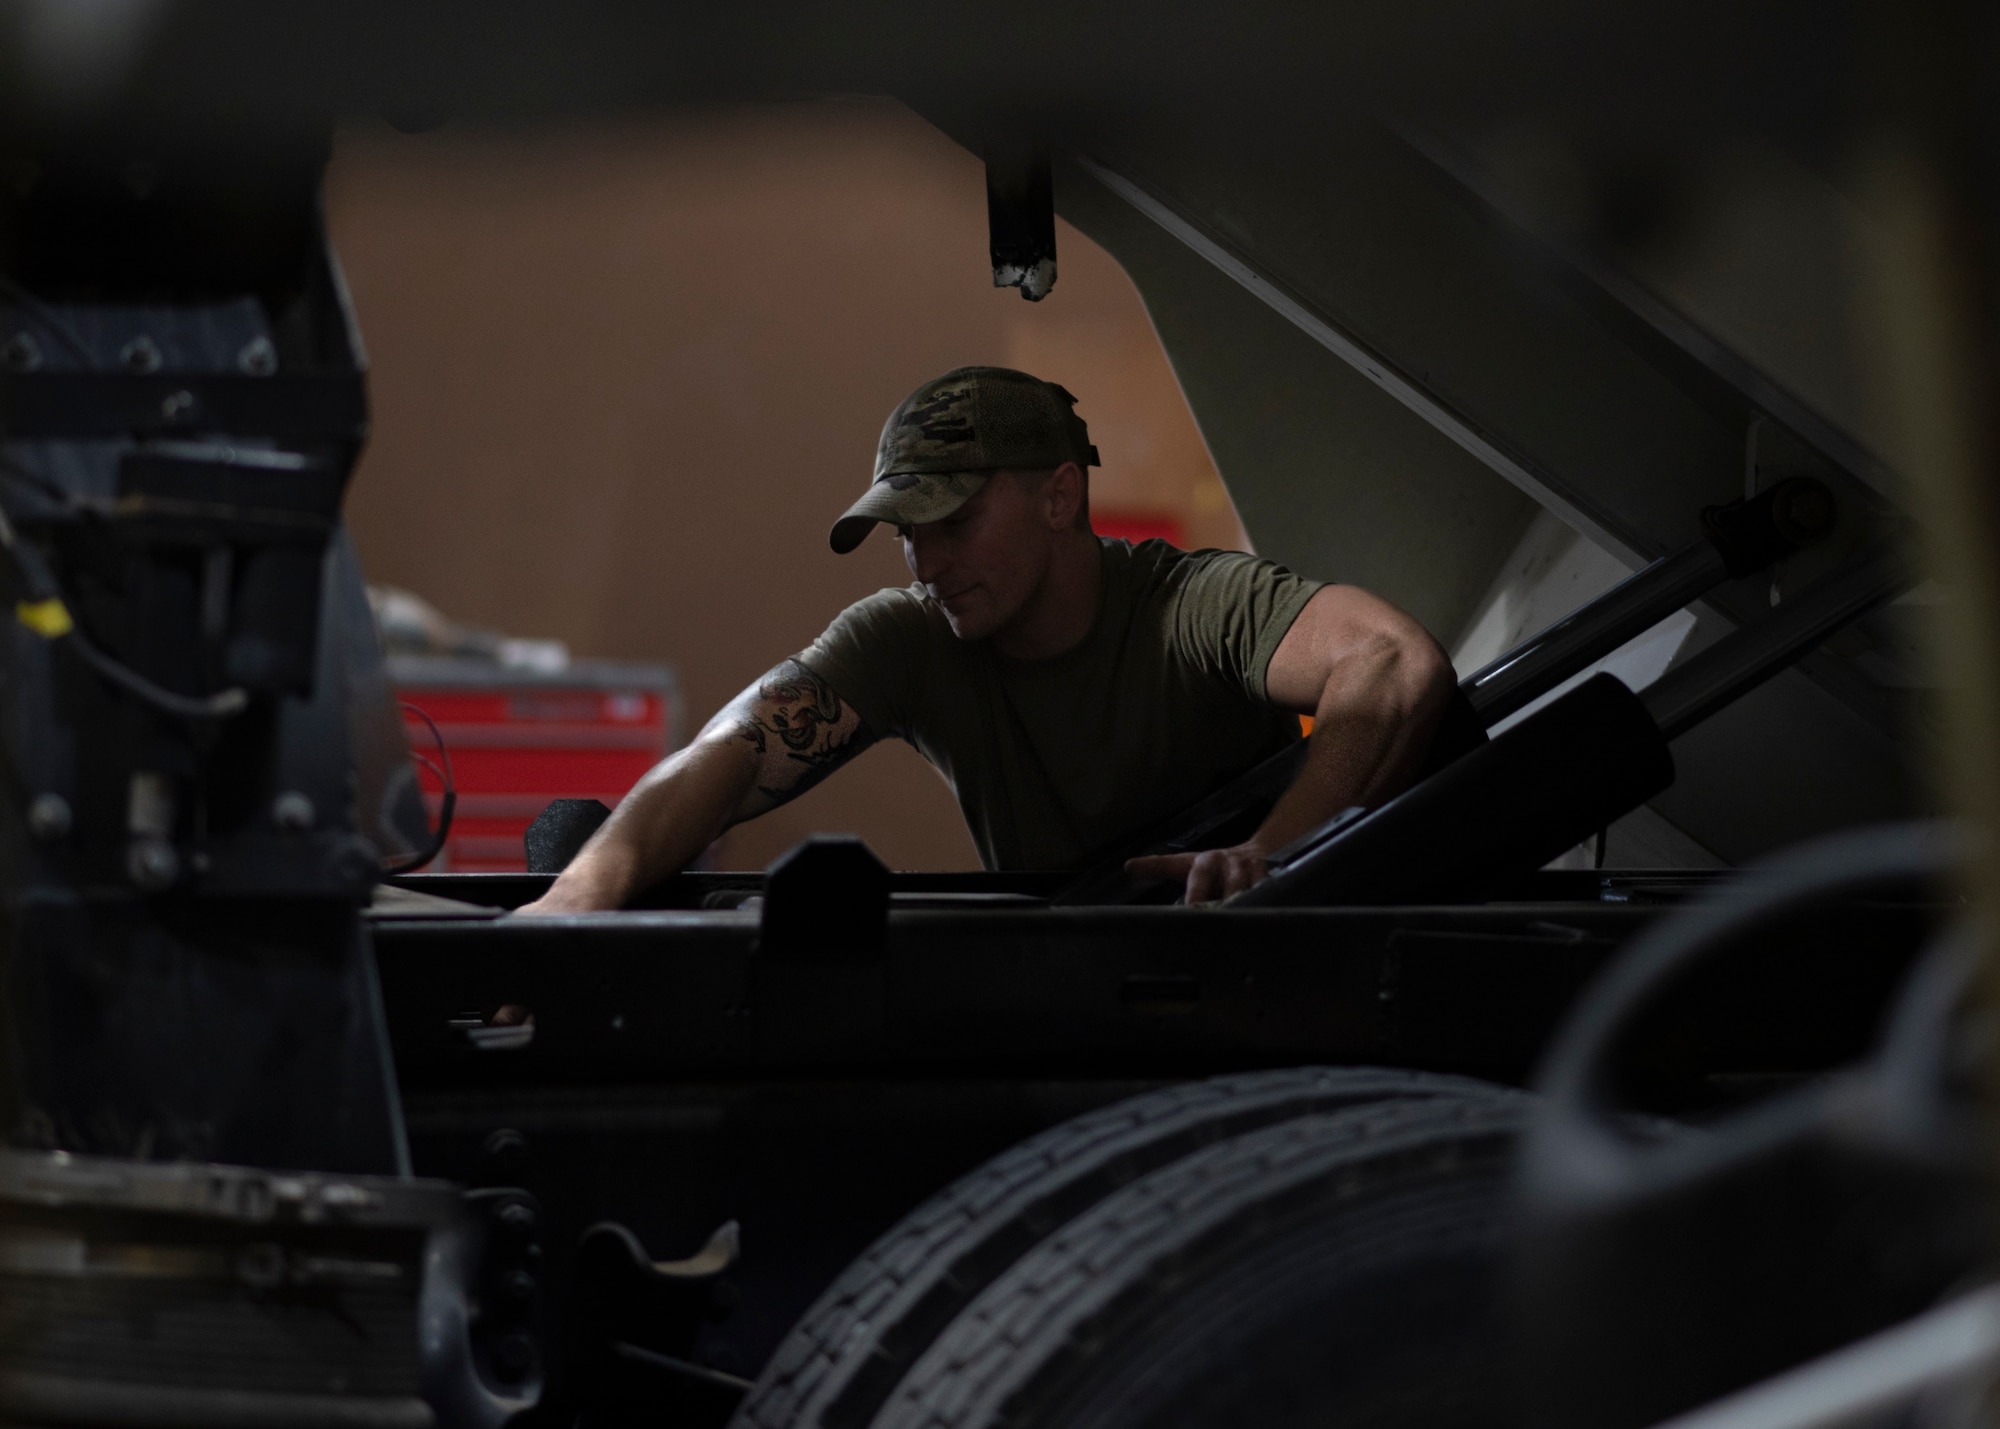 Airman 1st Class Mitchell Dise, a 386th Expeditionary Logistics Readiness Squadron vehicle maintenance technician, works on the sub-frame of a Tornado sweeper truck at Ali Al Salem Air Base, Kuwait, Nov. 8, 2021. The 386th ELRS vehicle management flight and the 386th Expeditionary Maintenance Squadron metals technology collaborated to repair this truck to combat foreign object debris on the flightline. (U.S. Air Force photo by Staff Sgt. Ryan Brooks)